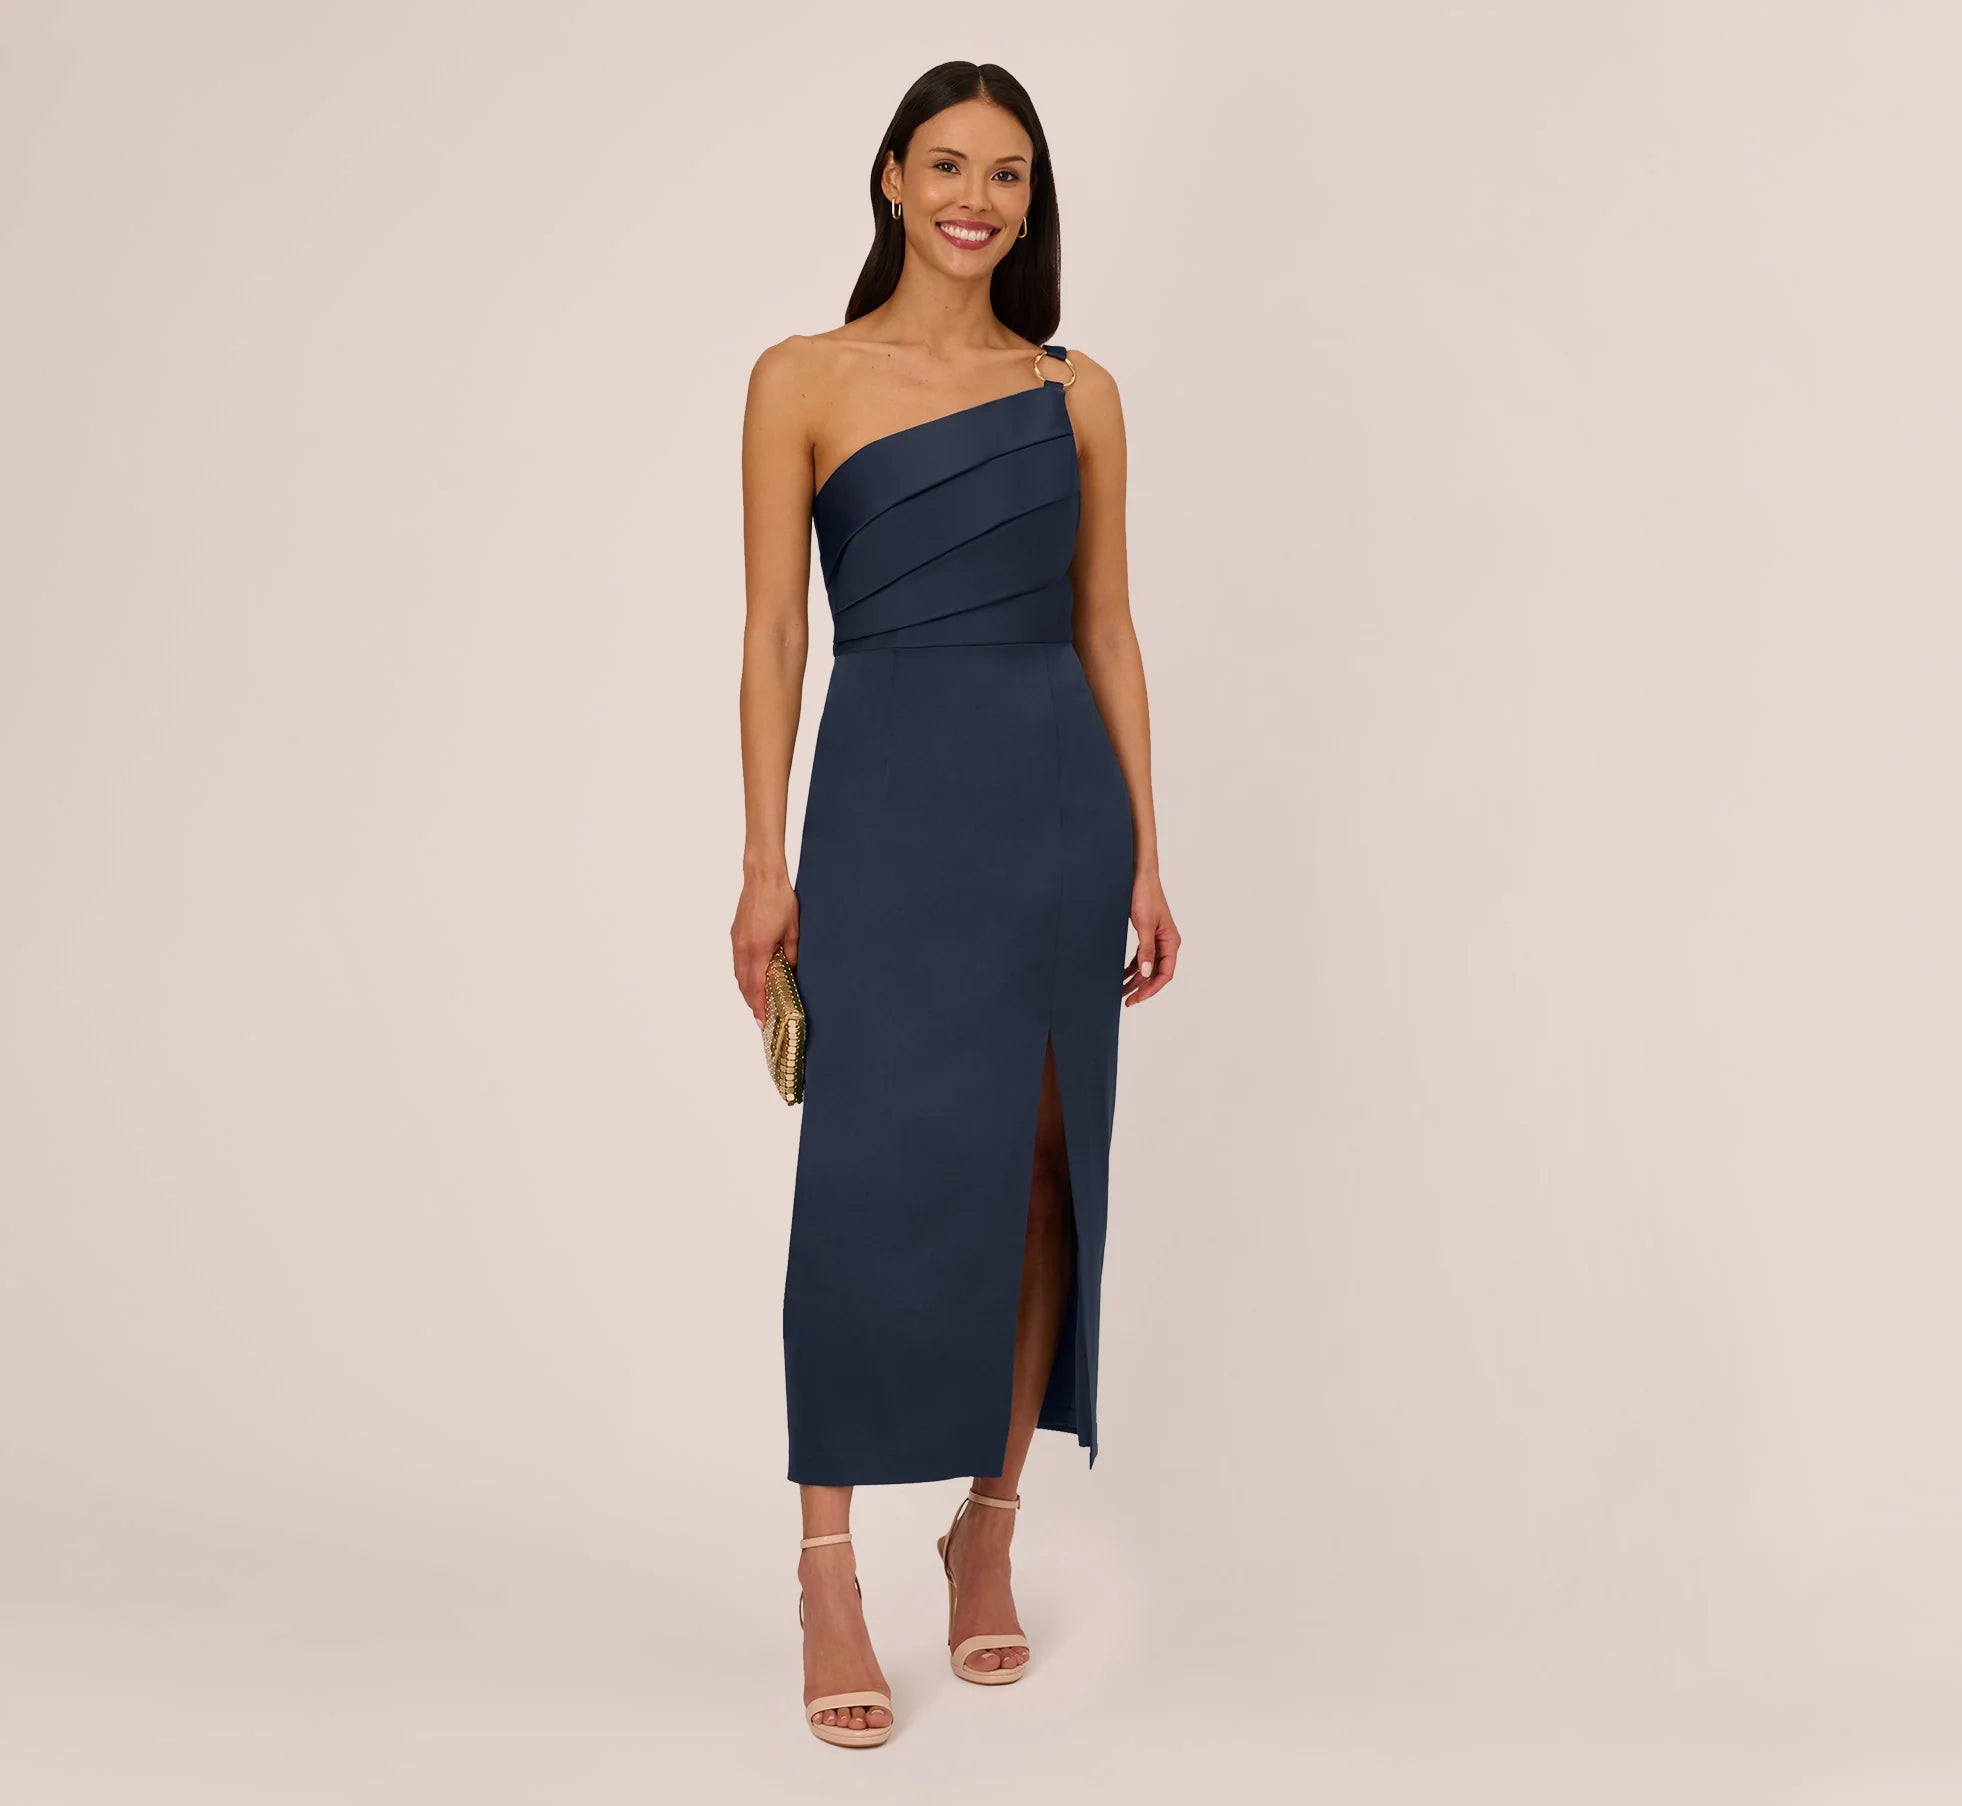 Adrianna Papell AP1E210669 - Pleated One Shoulder Dress
